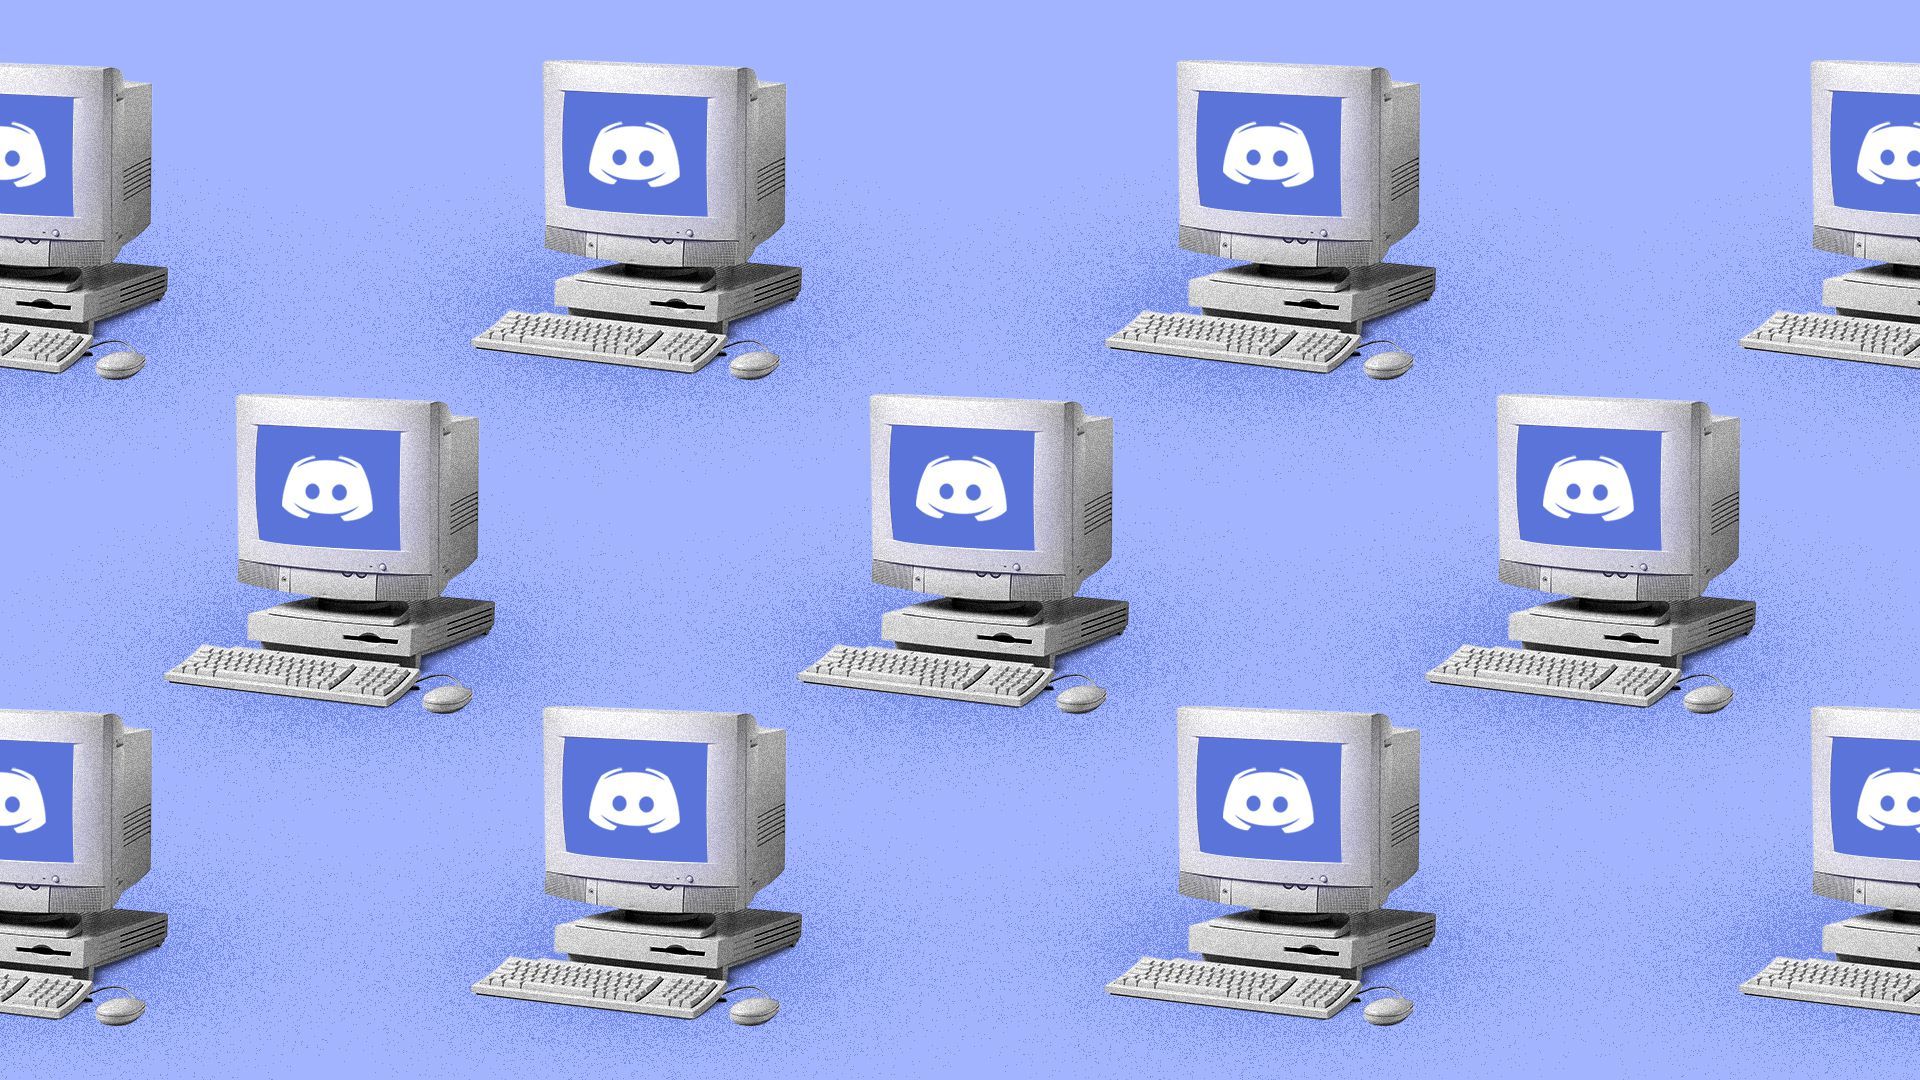 Illustration of a repeating pattern of computers with the Discord logo displayed on the screen. 